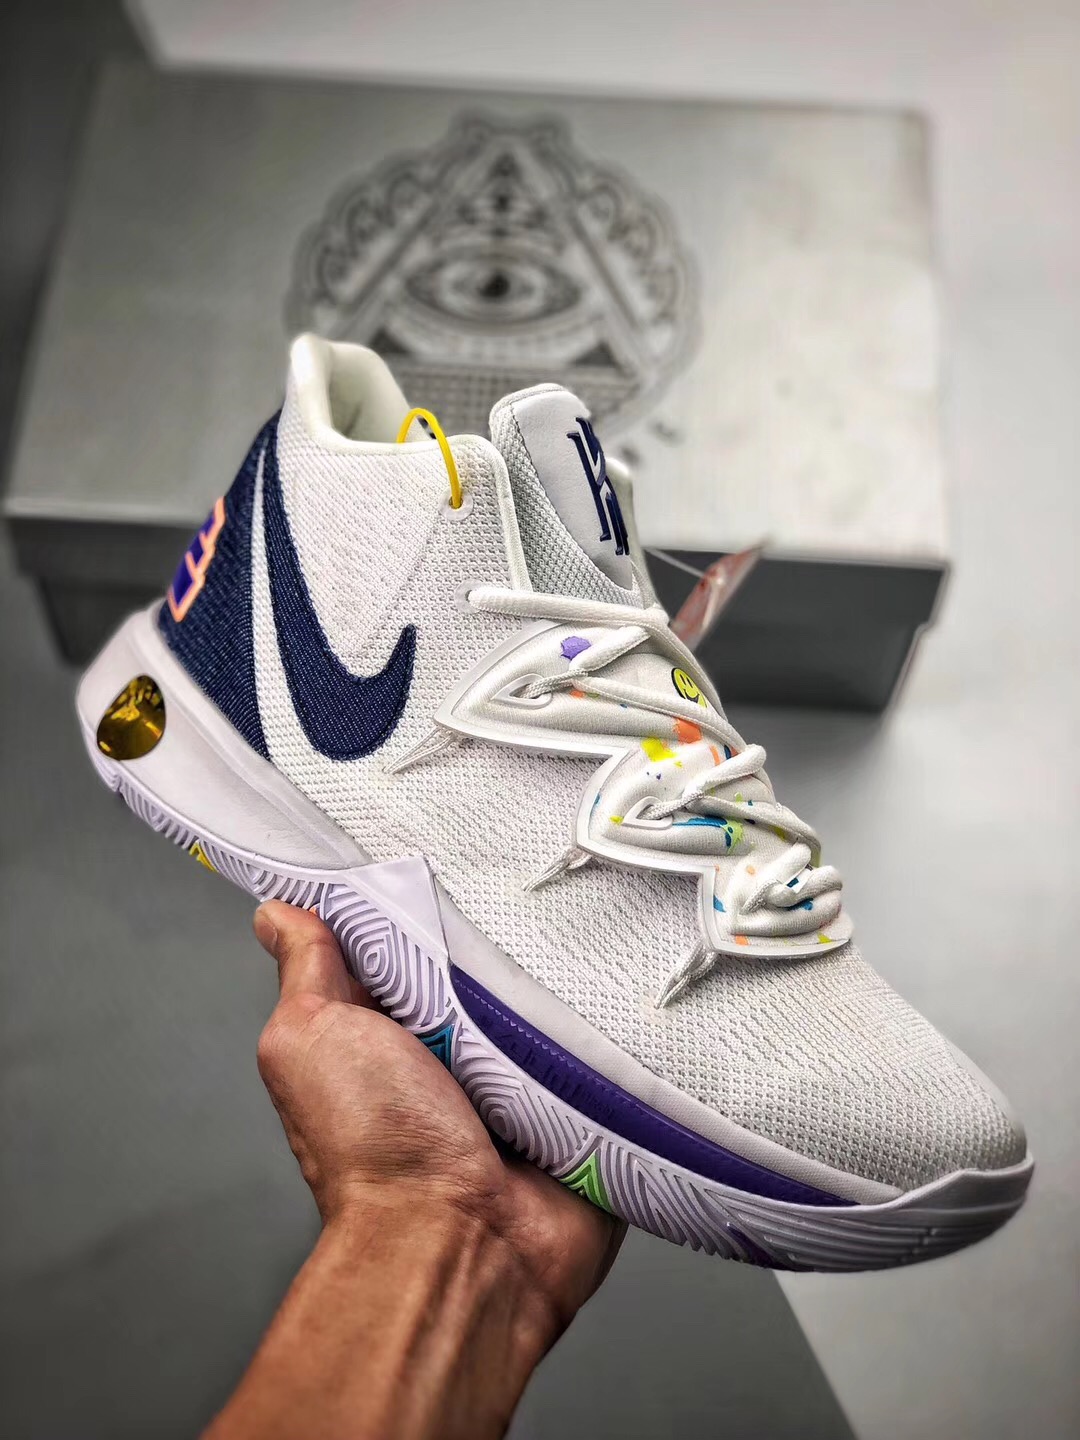 Kyrie 5 Ep Kyrie Irving 5 Yellow Sports Men 's Basketball Shoes